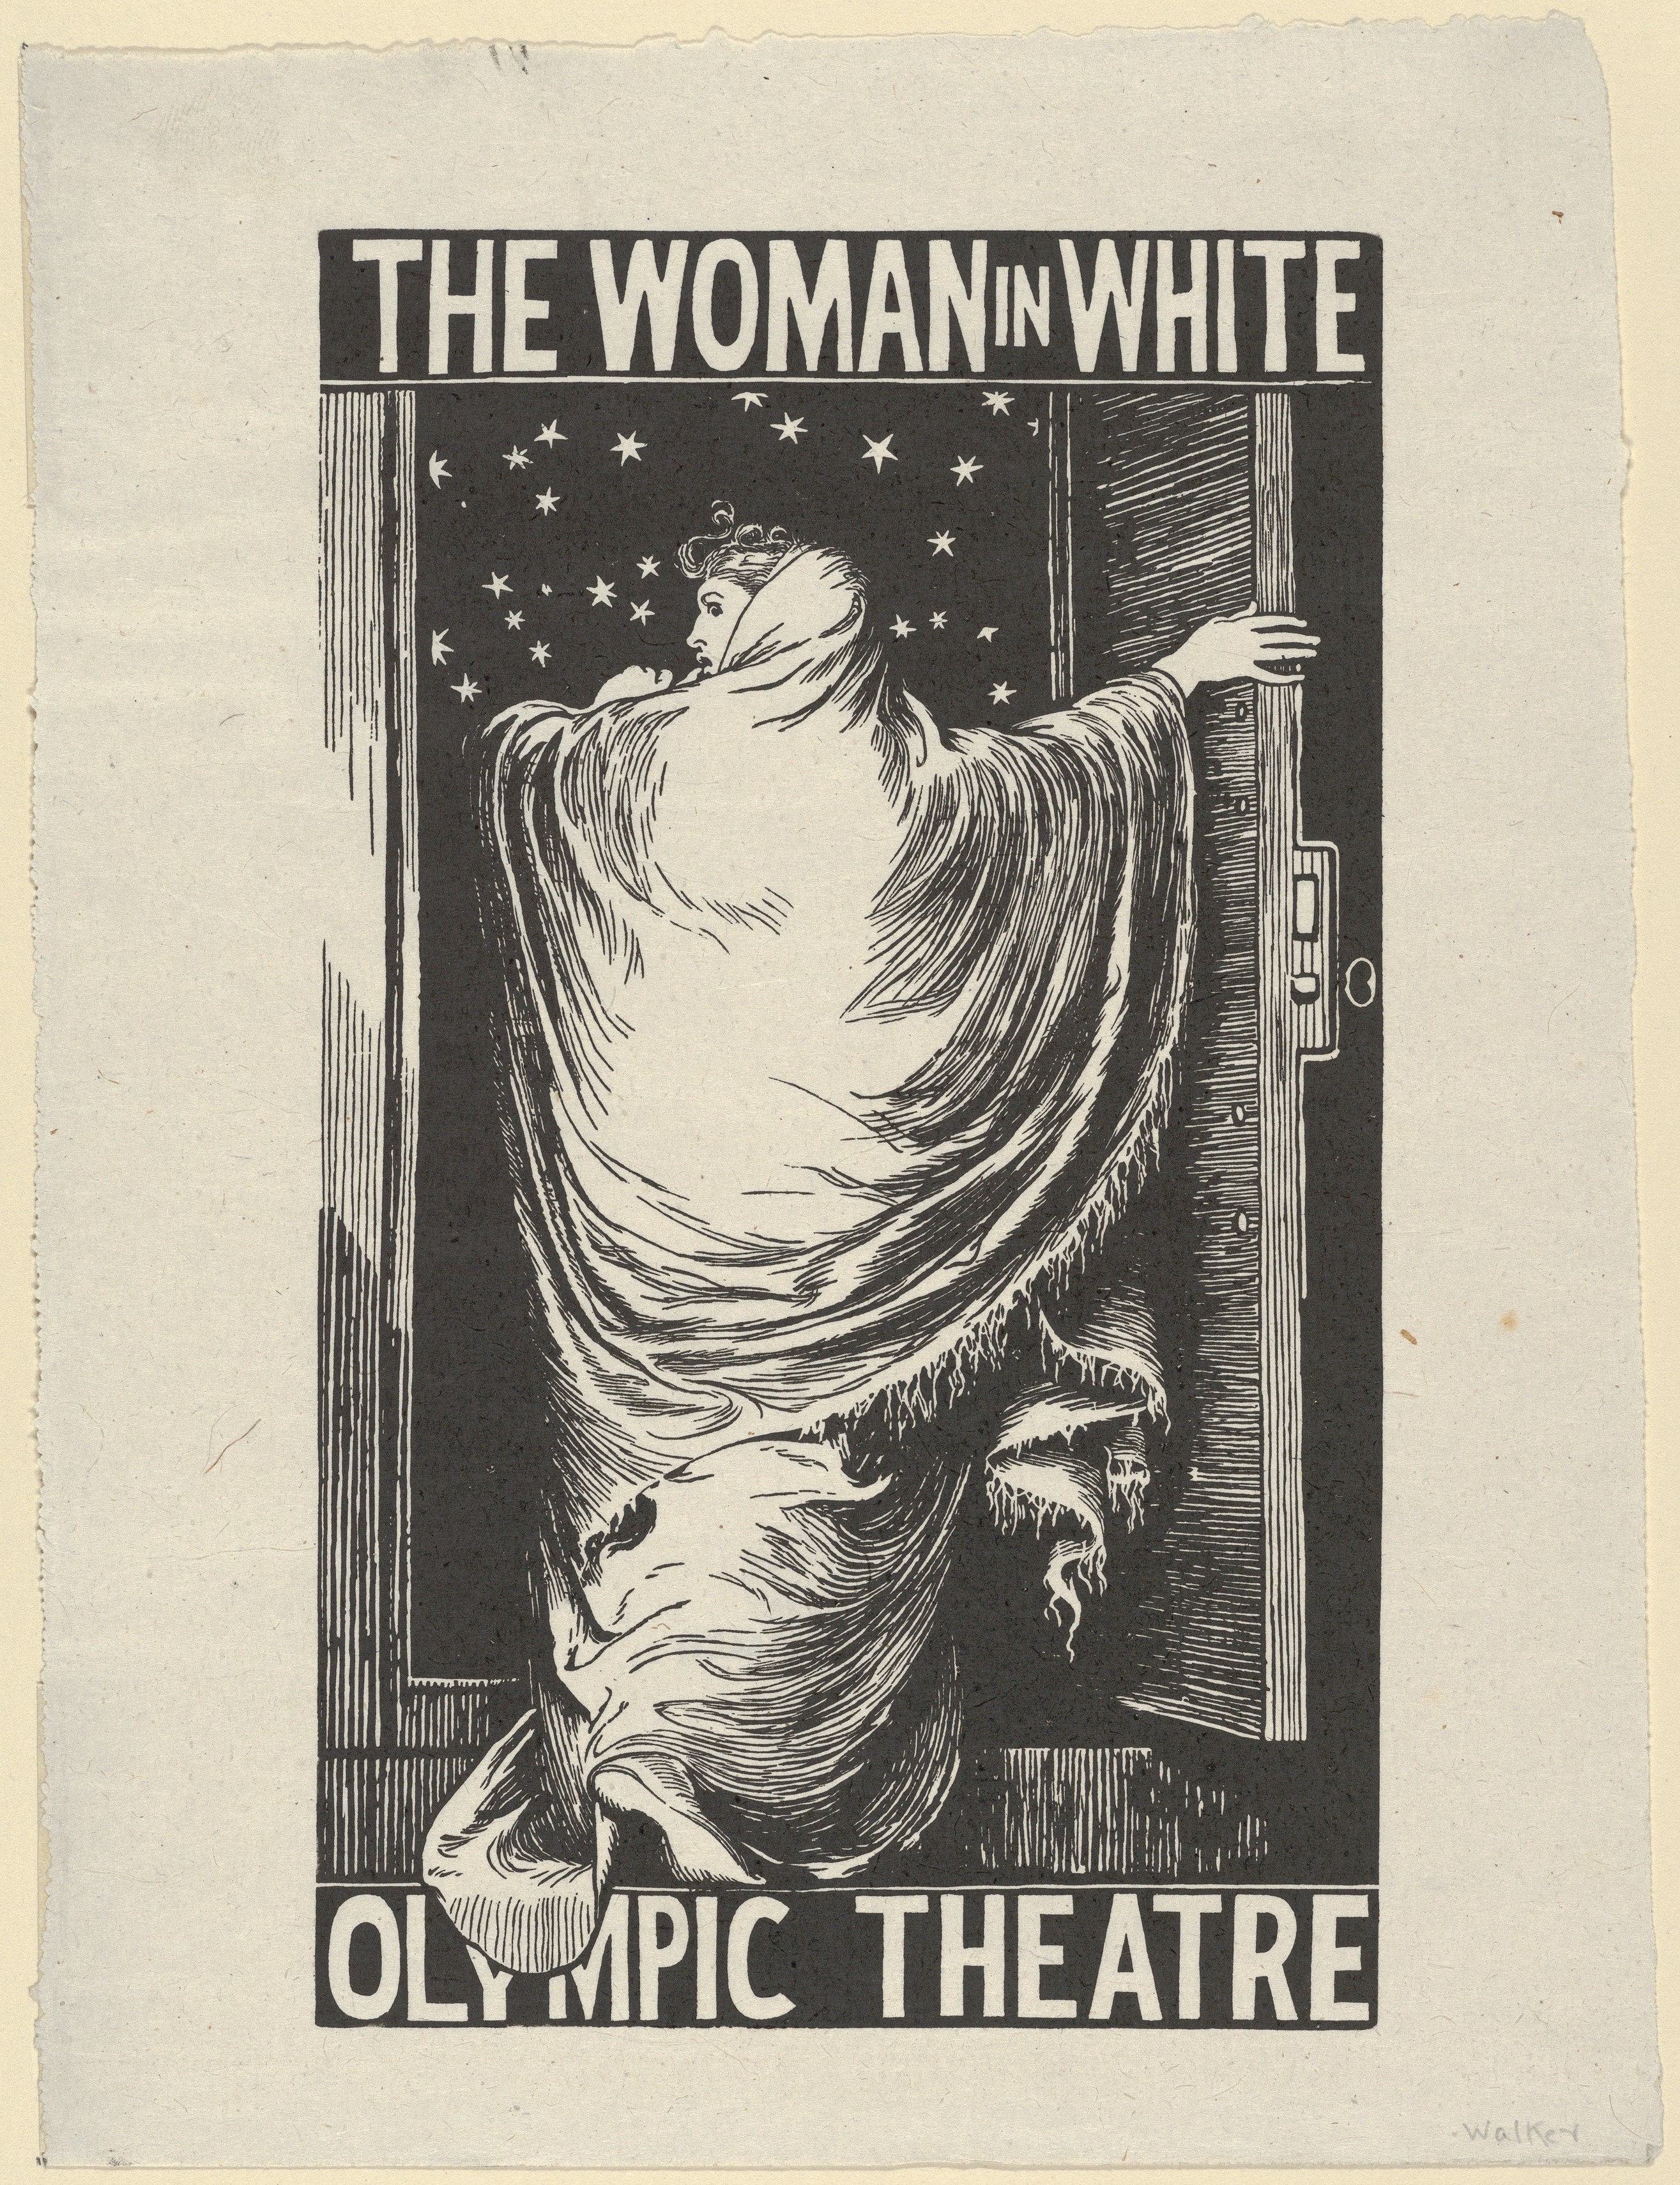 Block cut by William Harcourt Hooper, The Woman in White